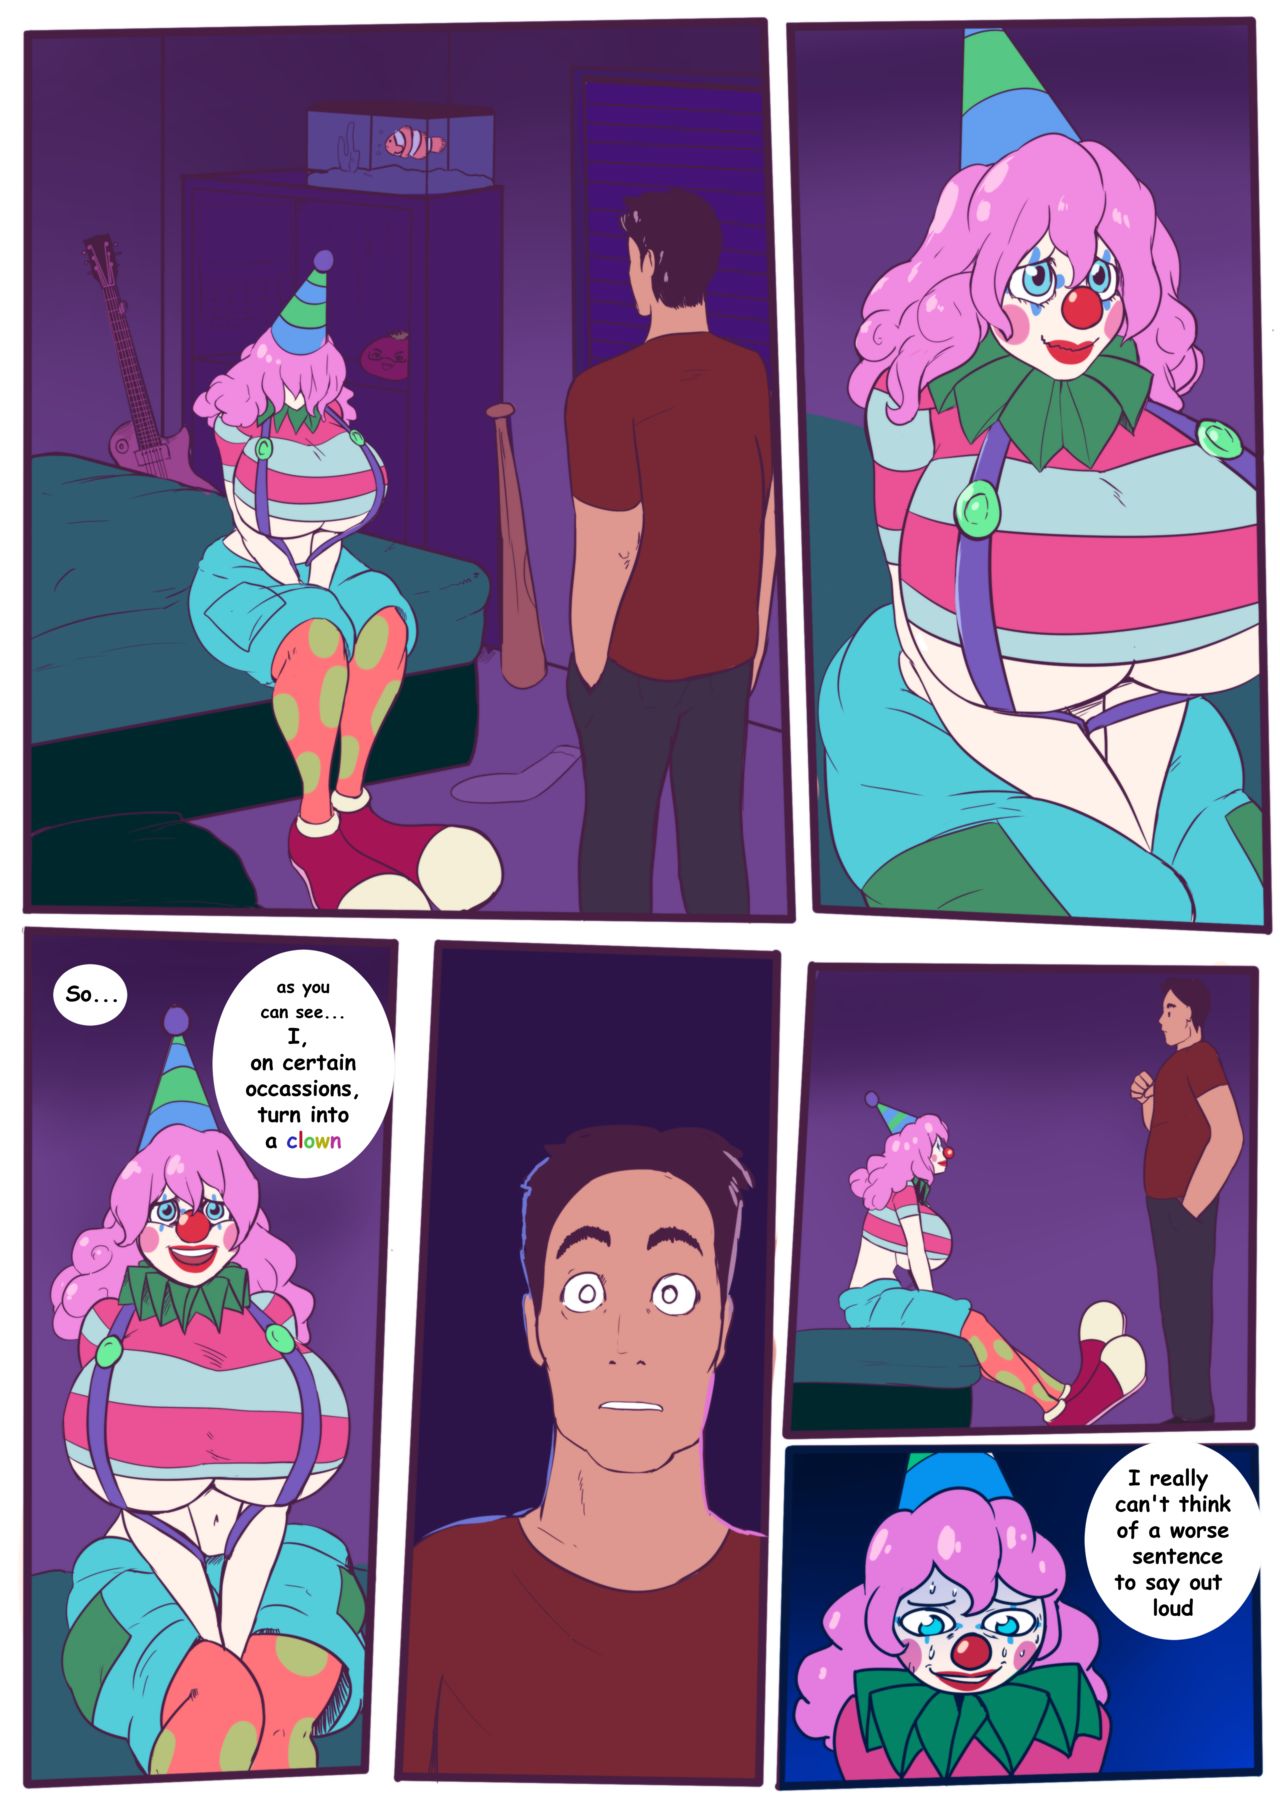 A Perfectly Normal Comic Where Nothing Weird Happens Lemonfont 12